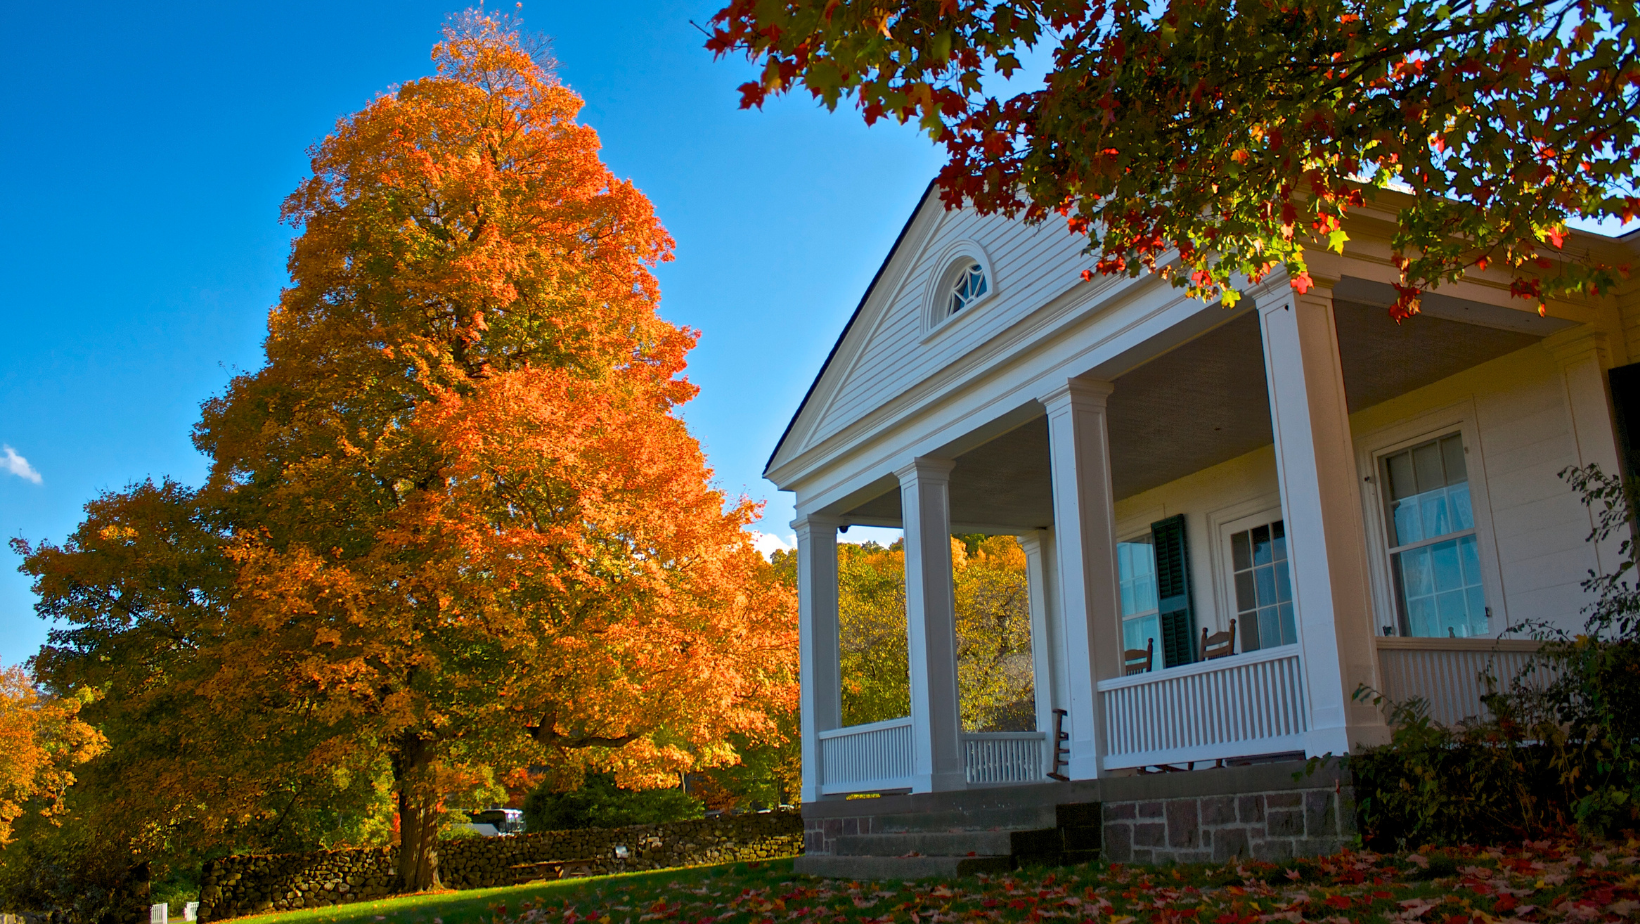 A mature maple tree with bright fall foliage highlights the front yard of an older Atlanta-area home.